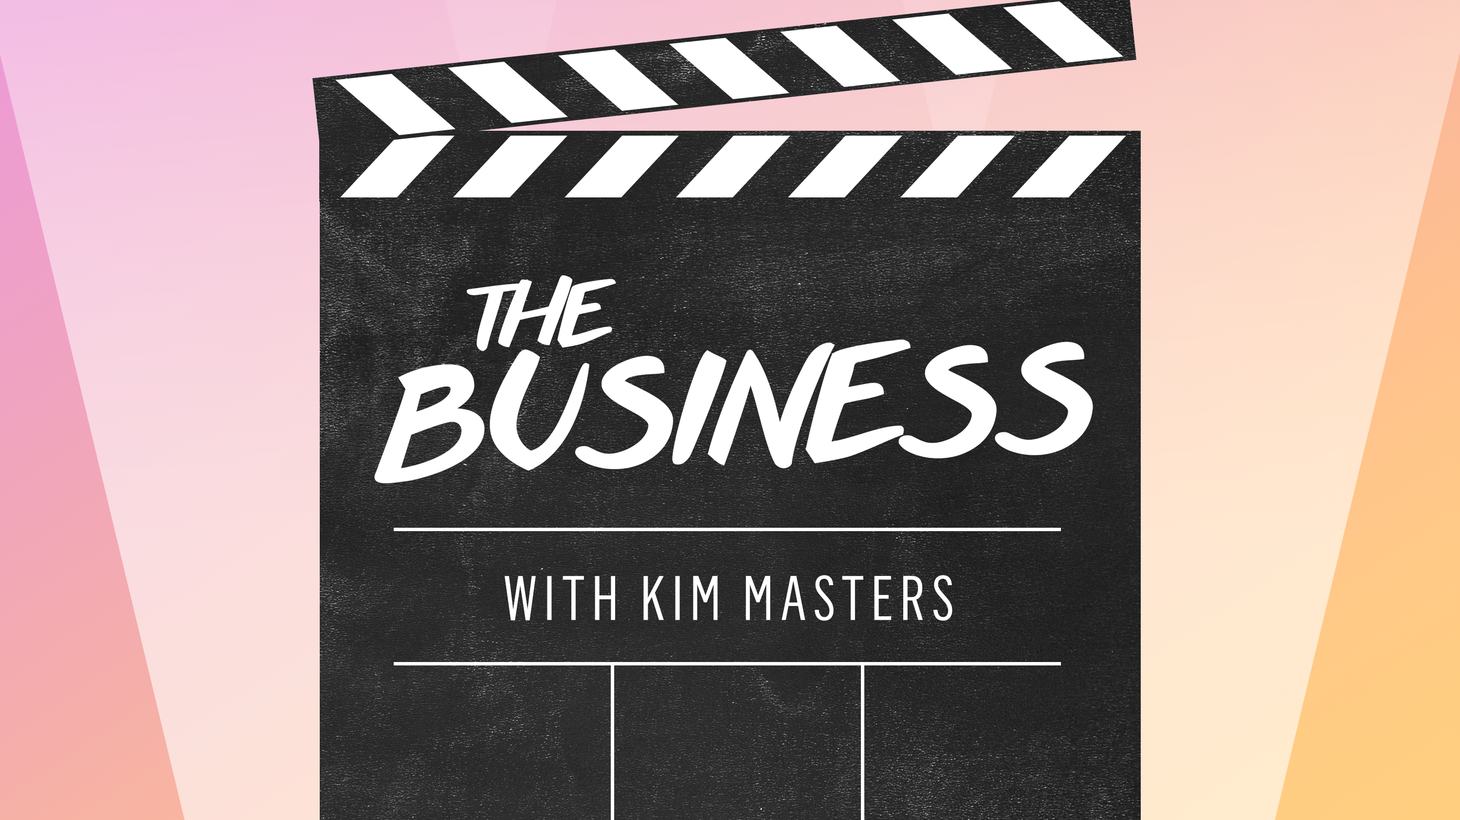 This week on The Business, everything you wanted to know about being an assistant, but were too terrified to ask. We talk with the authors of The Hollywood Assistants Handbook. Plus, an update on the actors' negotiations for a new contract.